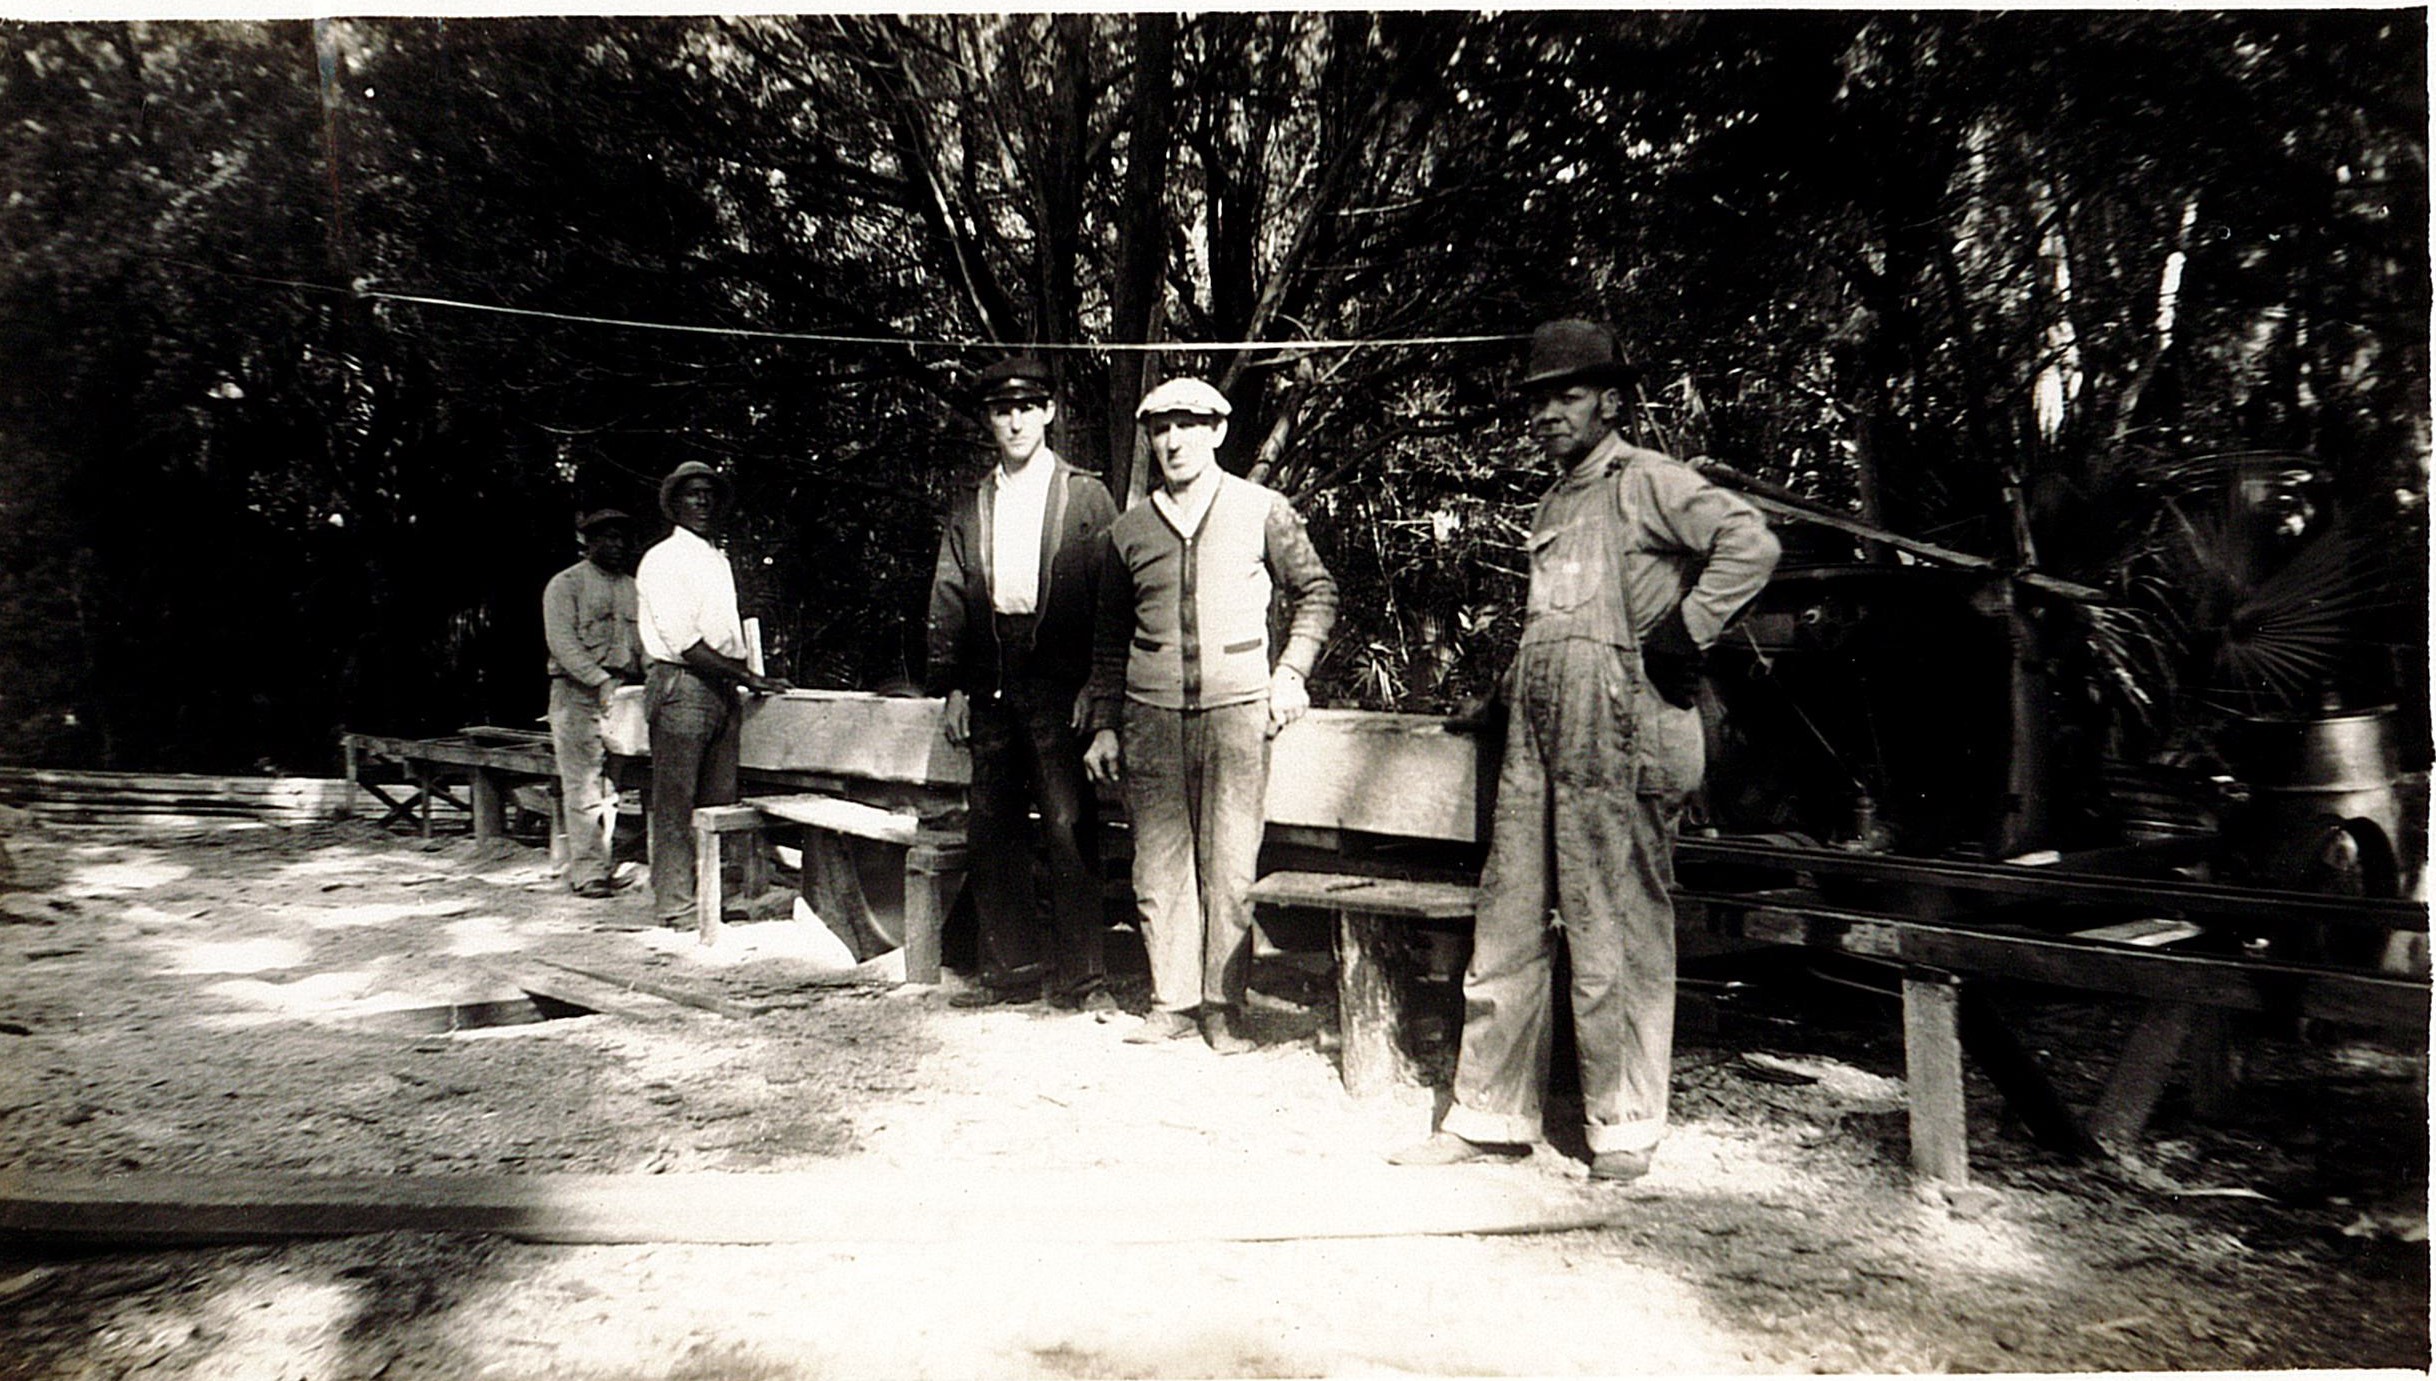 Lumber and turpentining were major agricultural industries in Central Florida in the 1920s that employed African American workers from Hannibal Square.